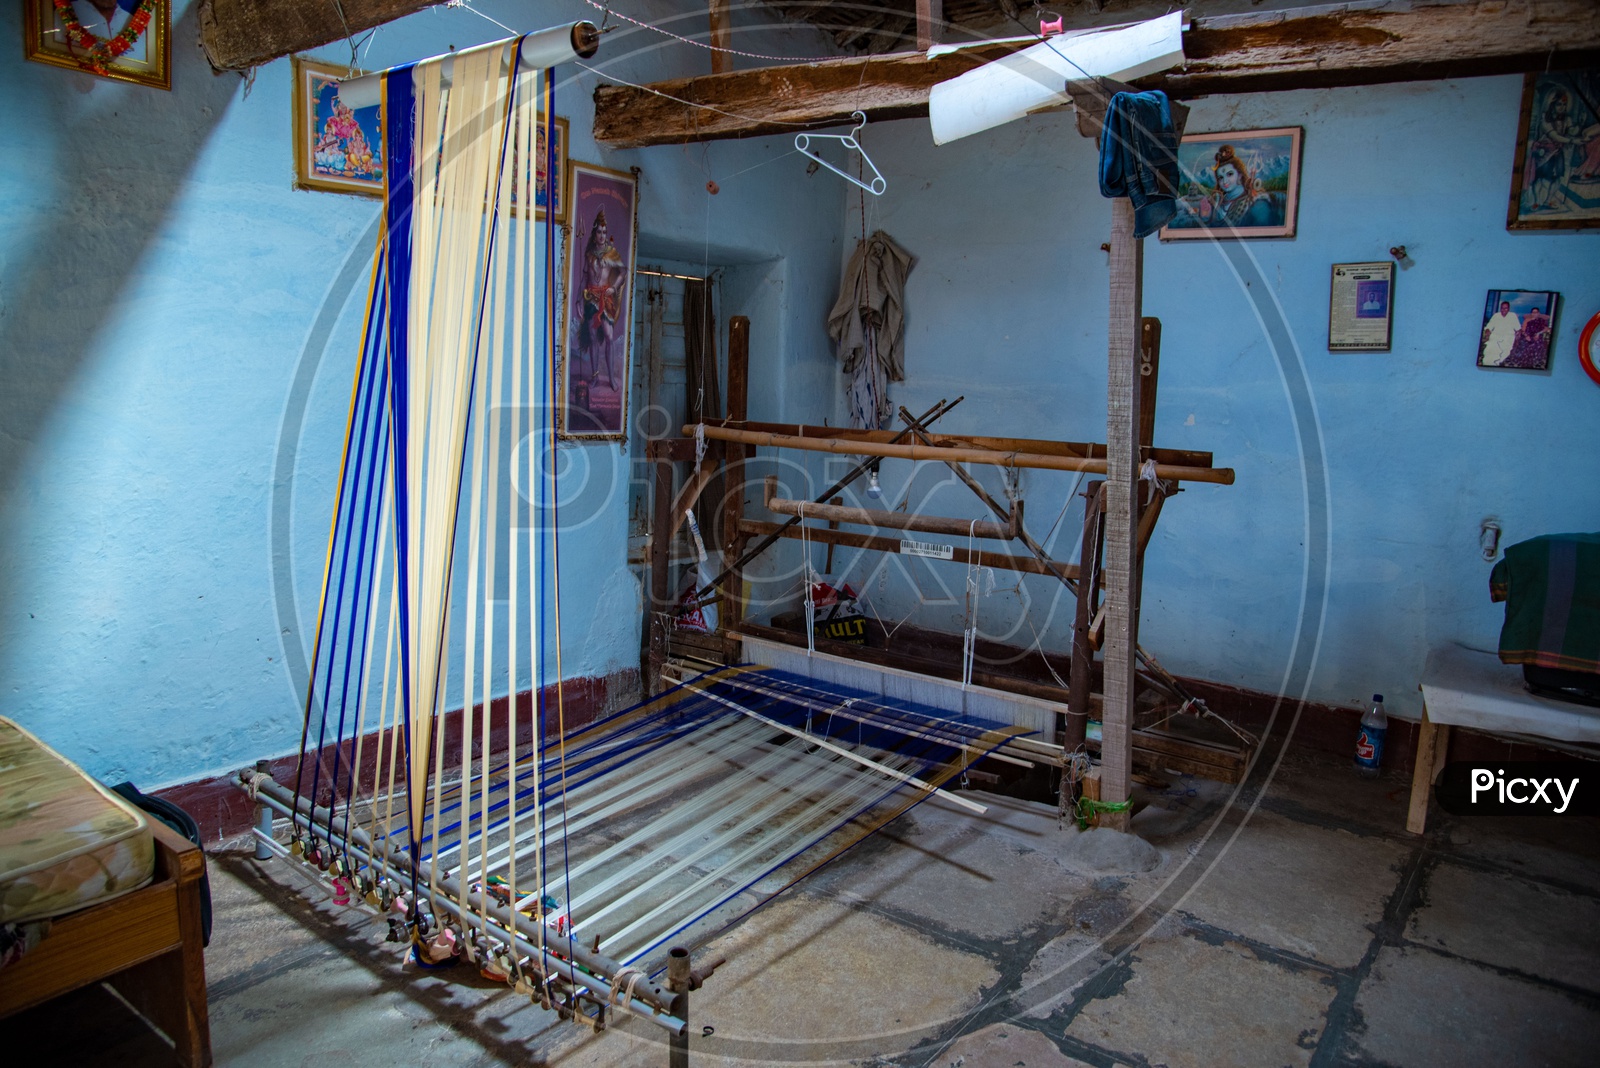 Hand operated weaving spindle in Pochampally Village